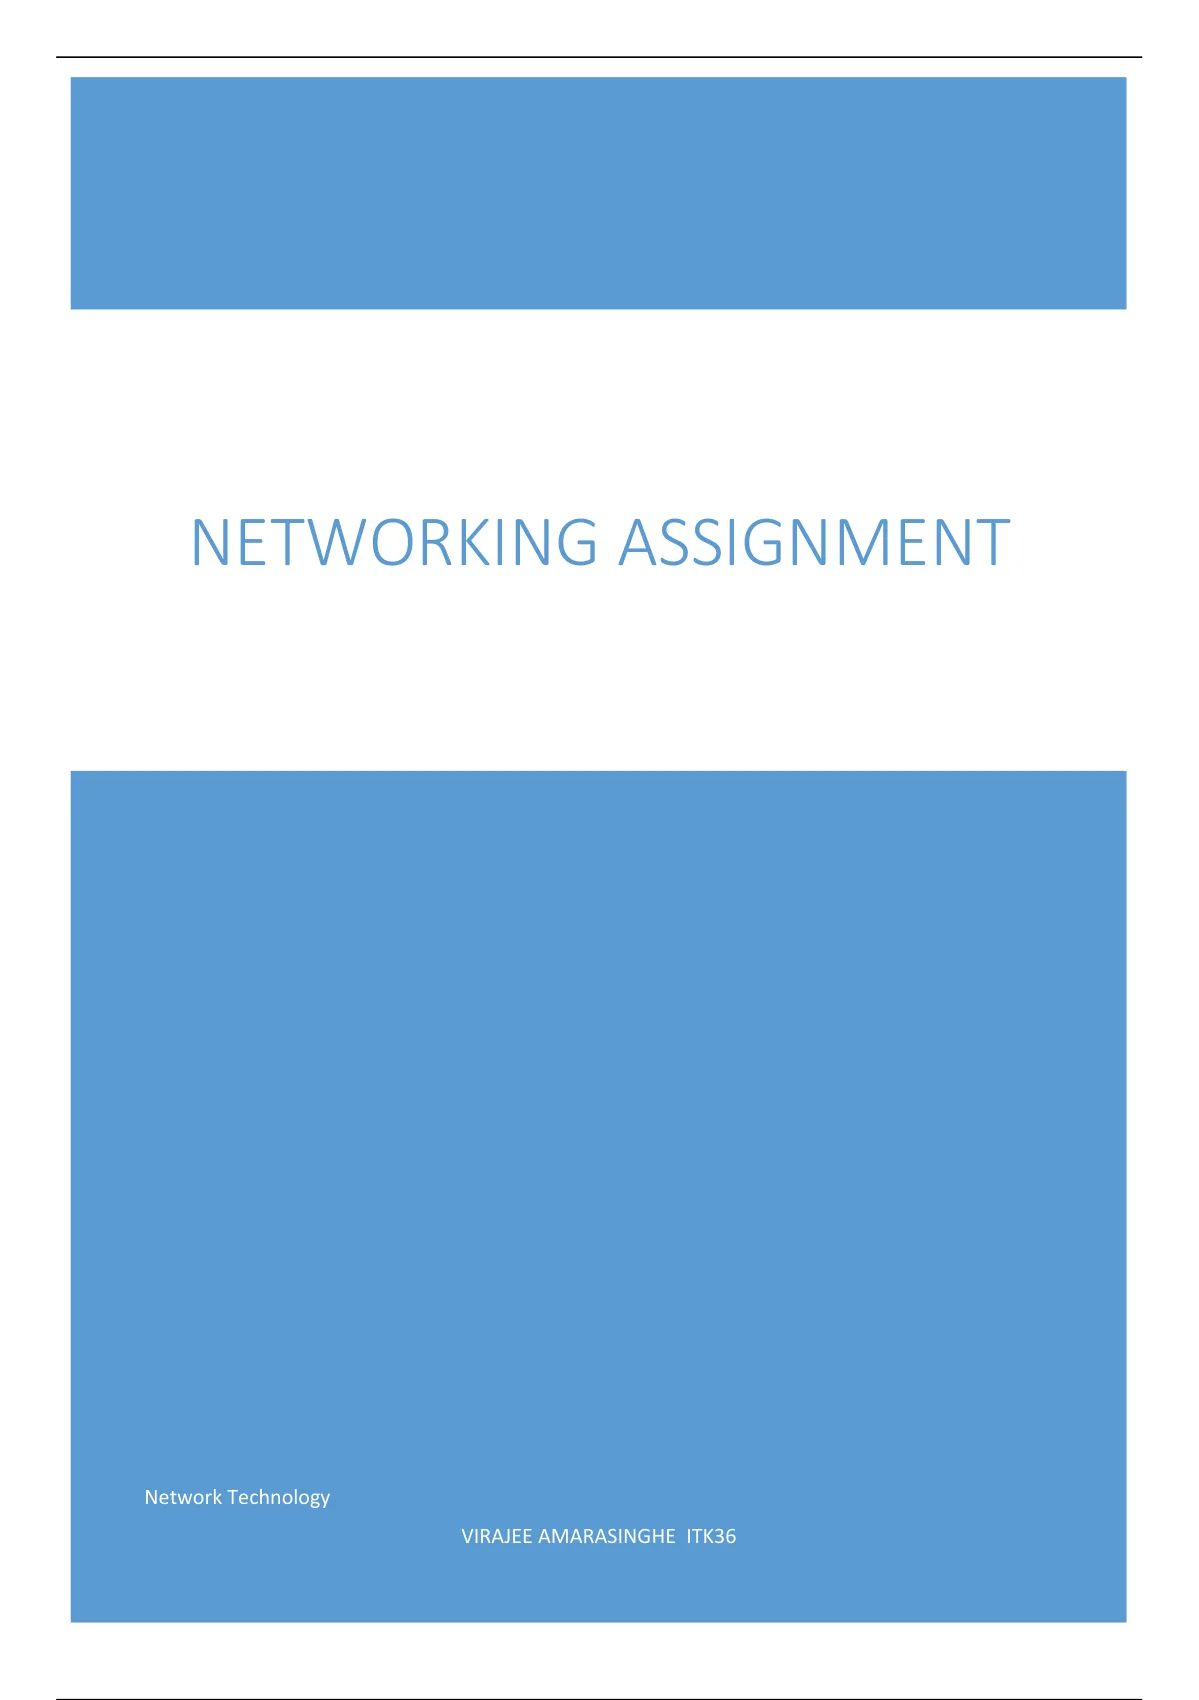 networking assignment pearson